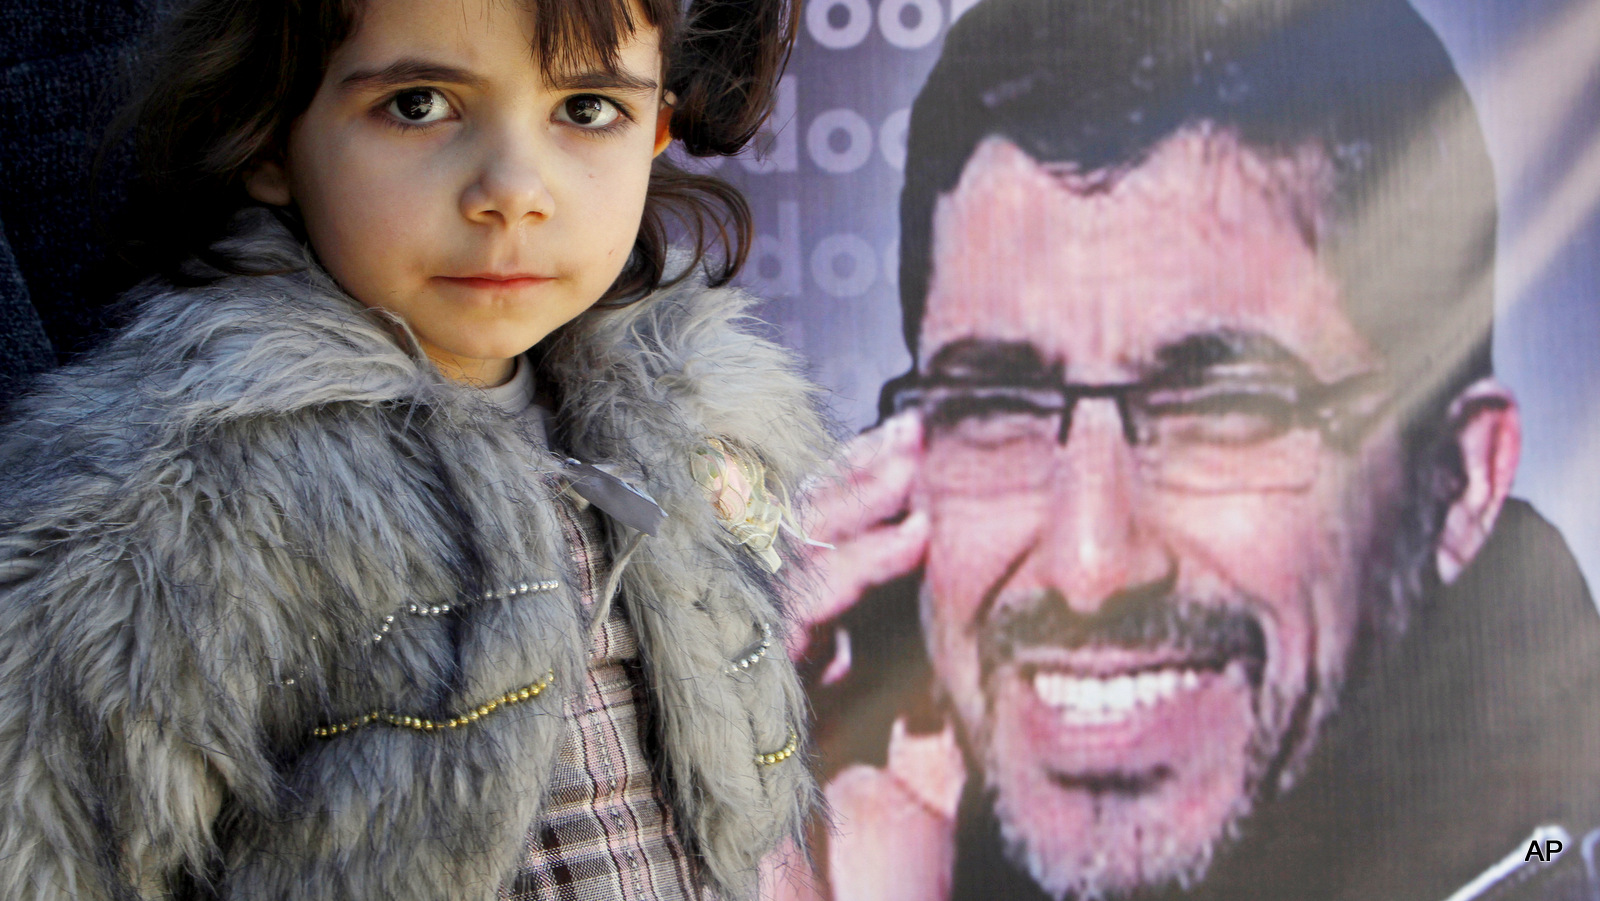 MariaAbu Sisi , pauses in front of a portrait of her father Dirar Abu Sisi